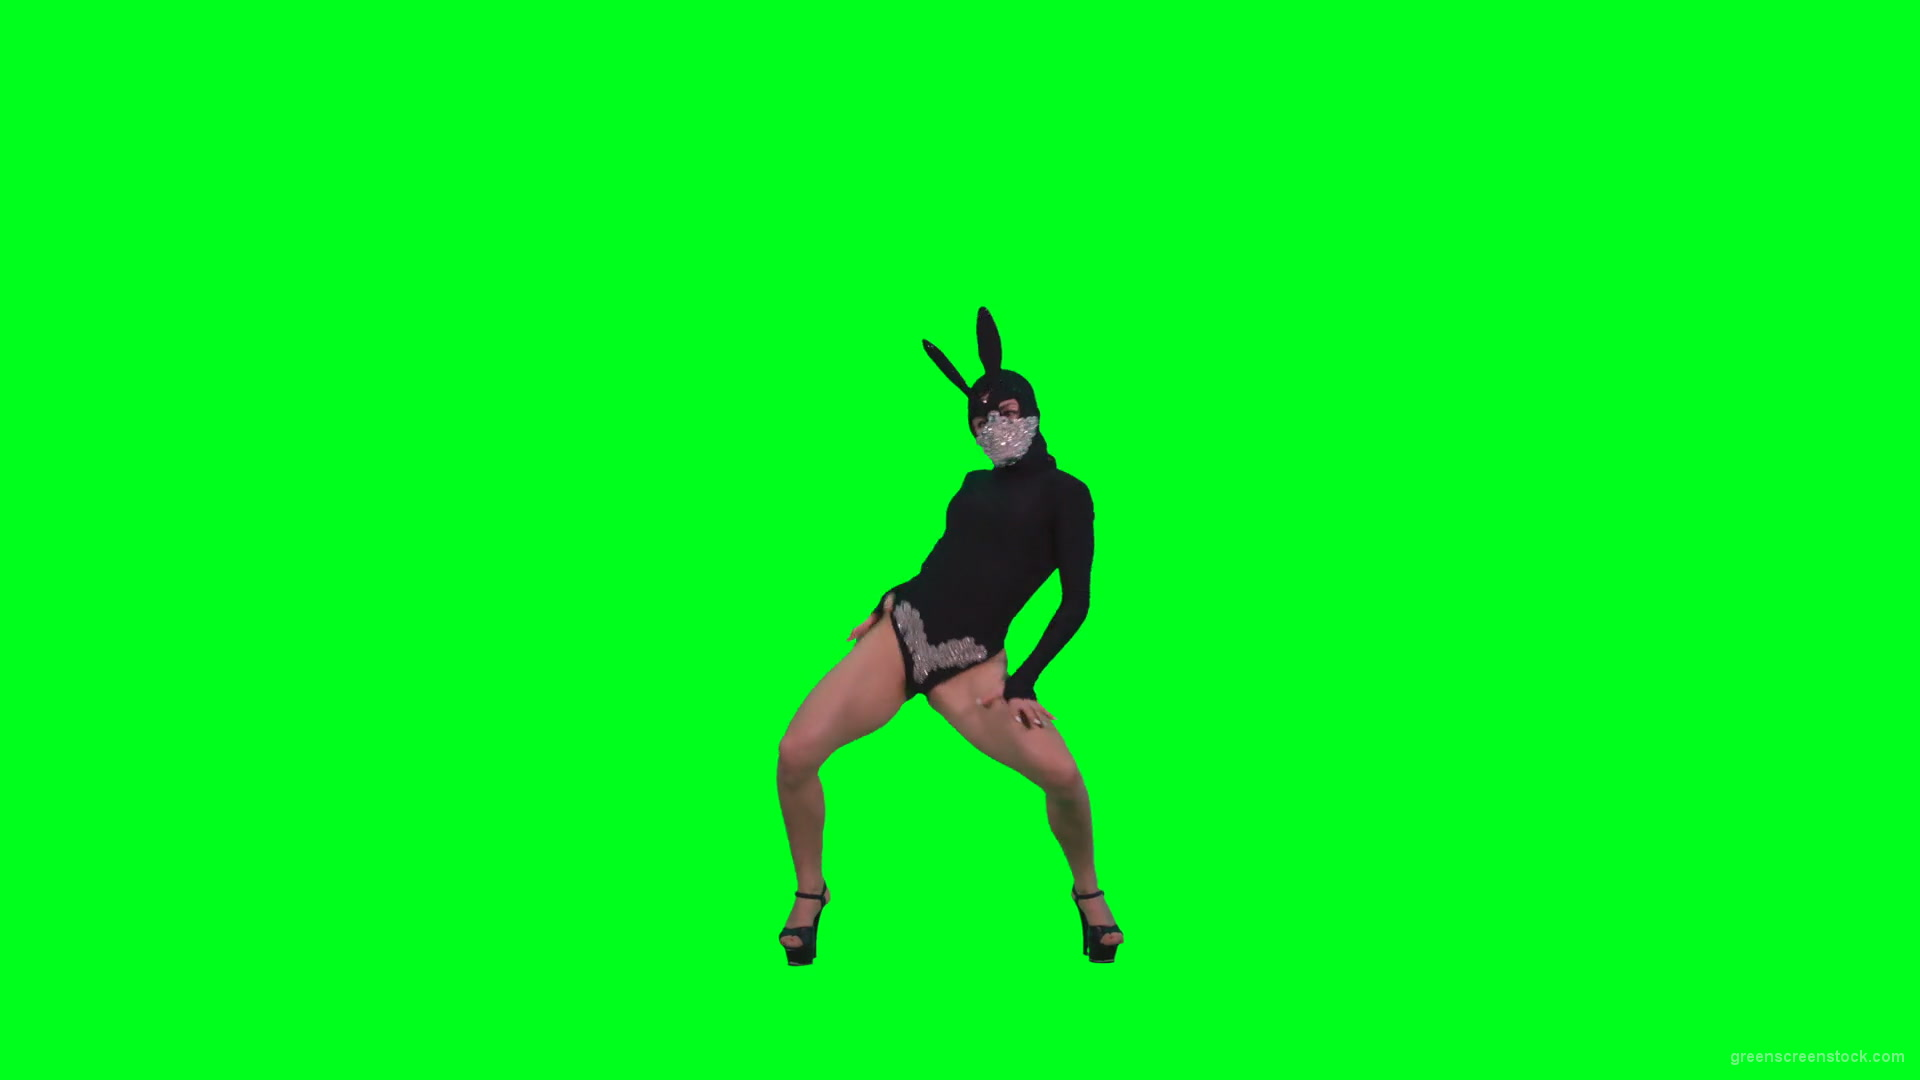 Girl-in-Black-Bunny-Costume-squatting-in-go-go-style-isolated-on-green-screen-4K-Video-Footage-1-1920_005 Green Screen Stock